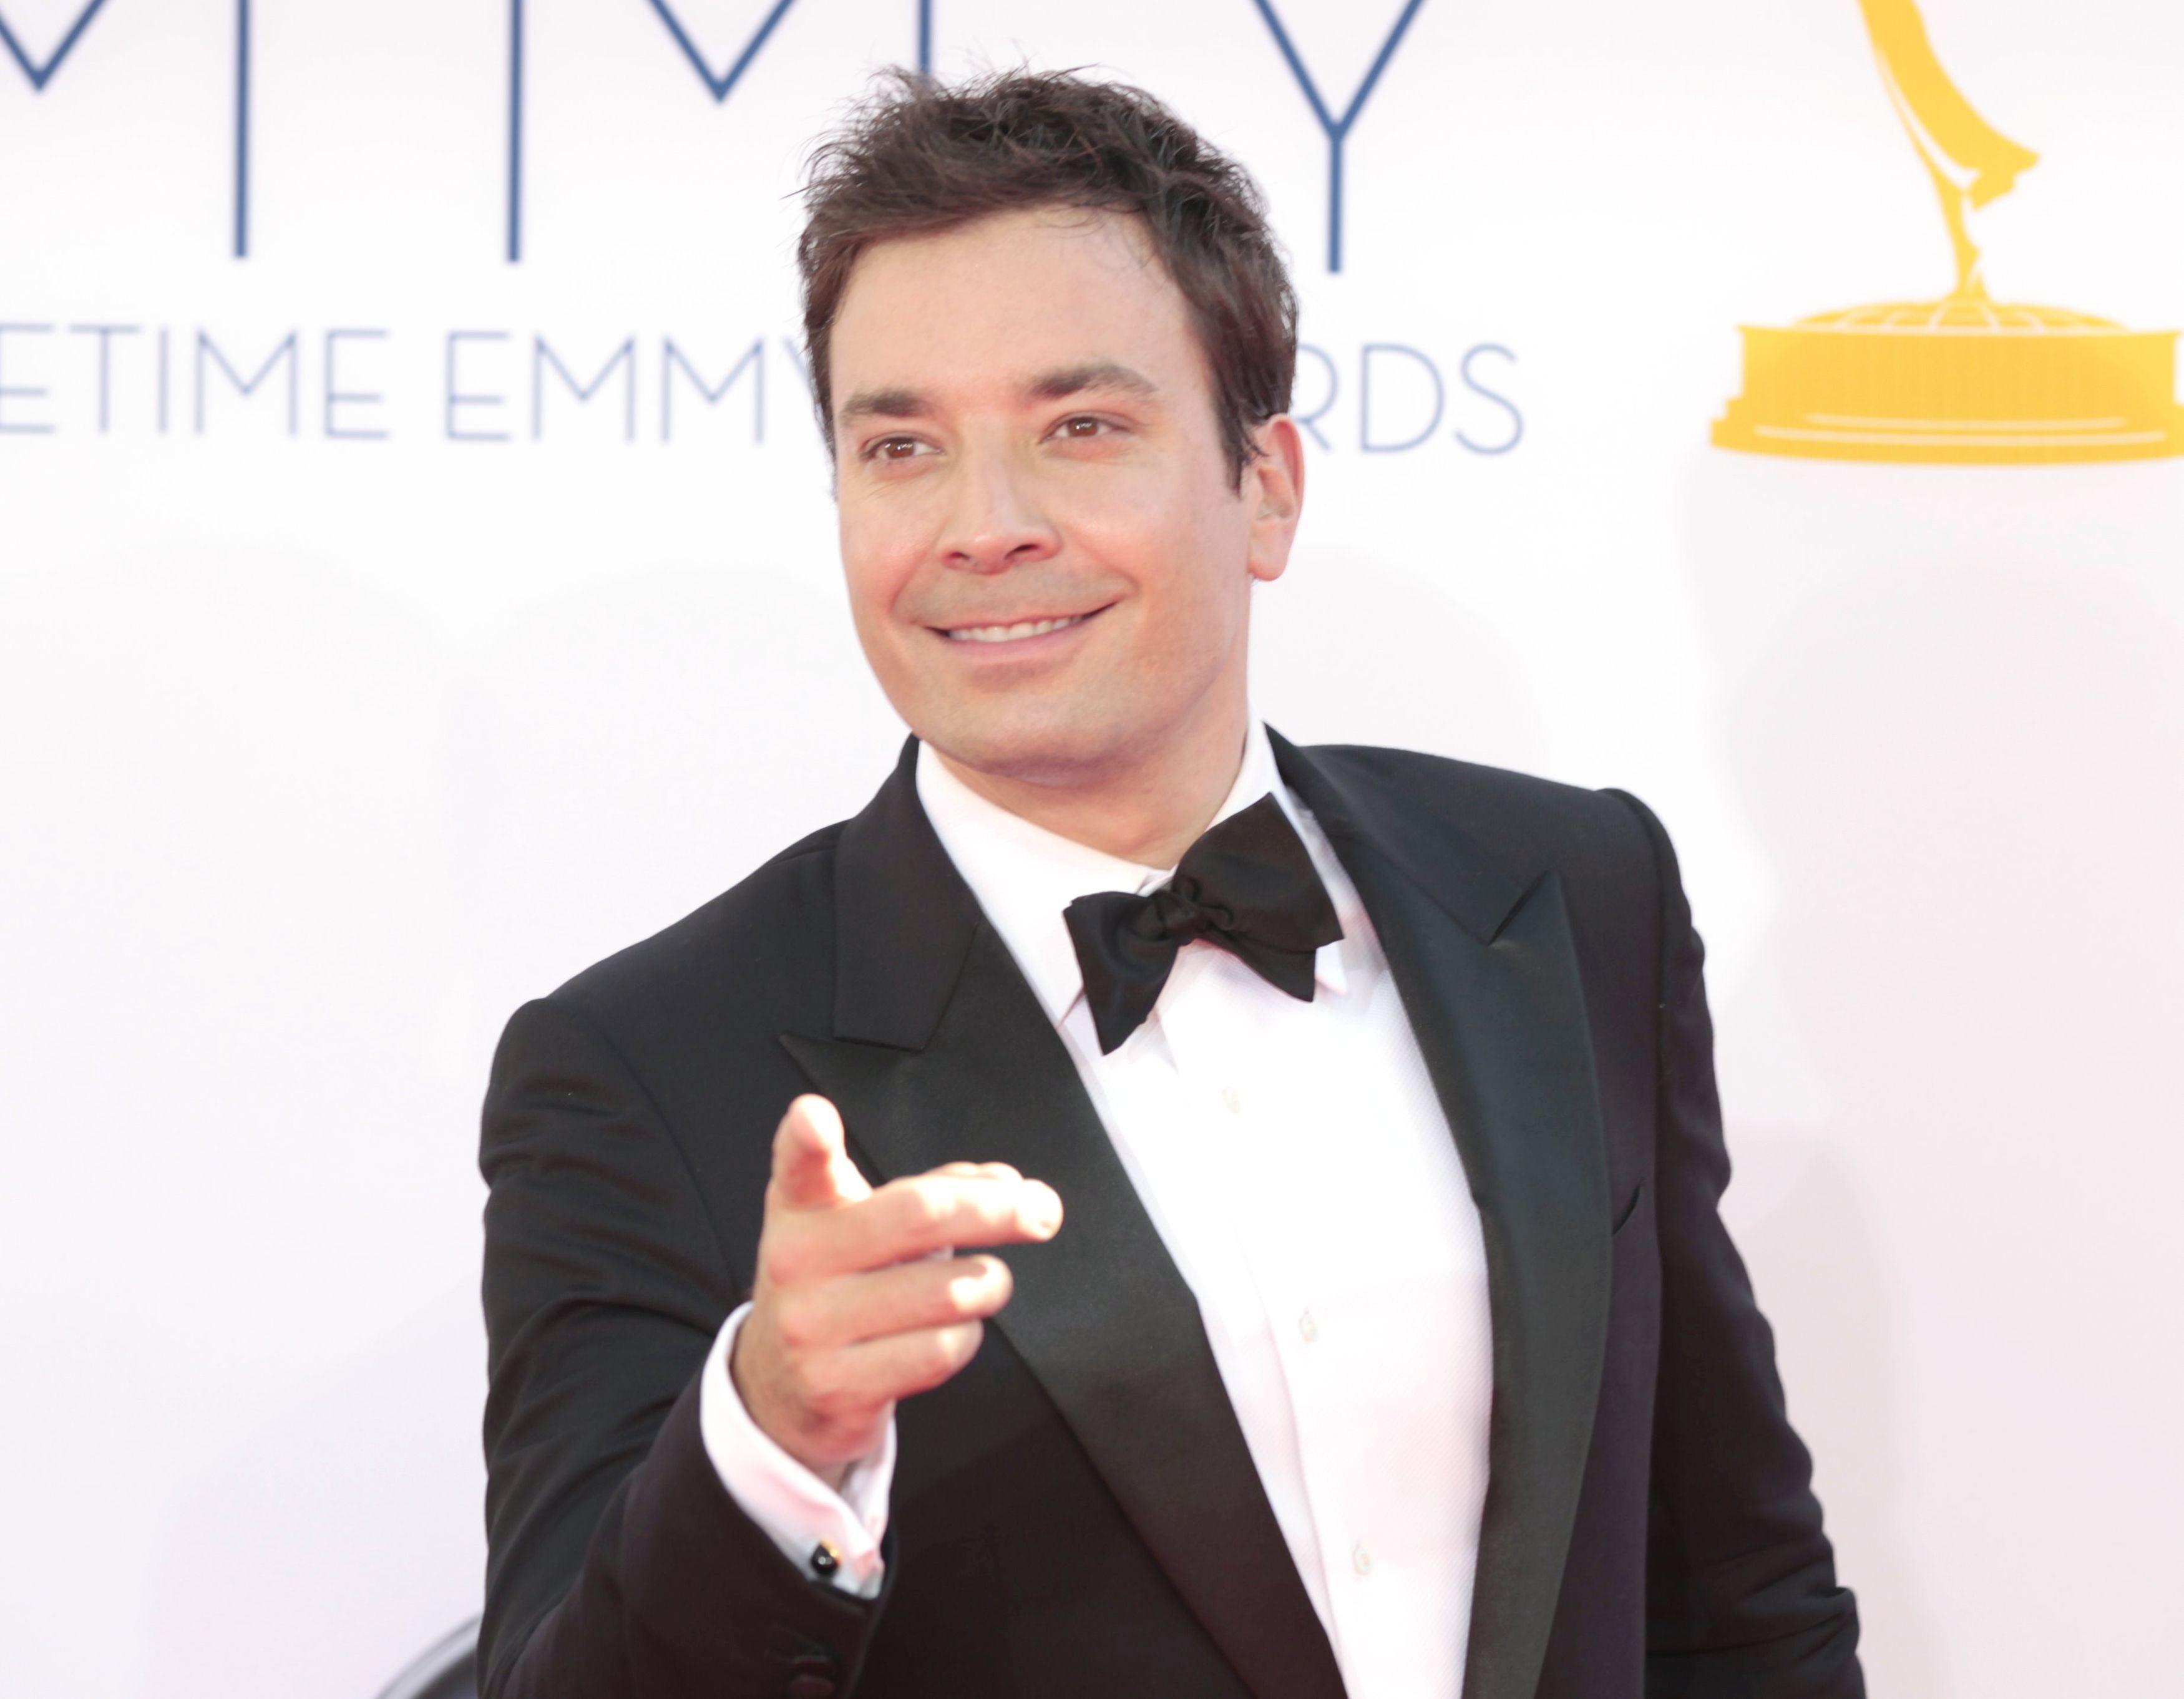 Lessons Learned From the Hilariously Funny Jimmy Fallon